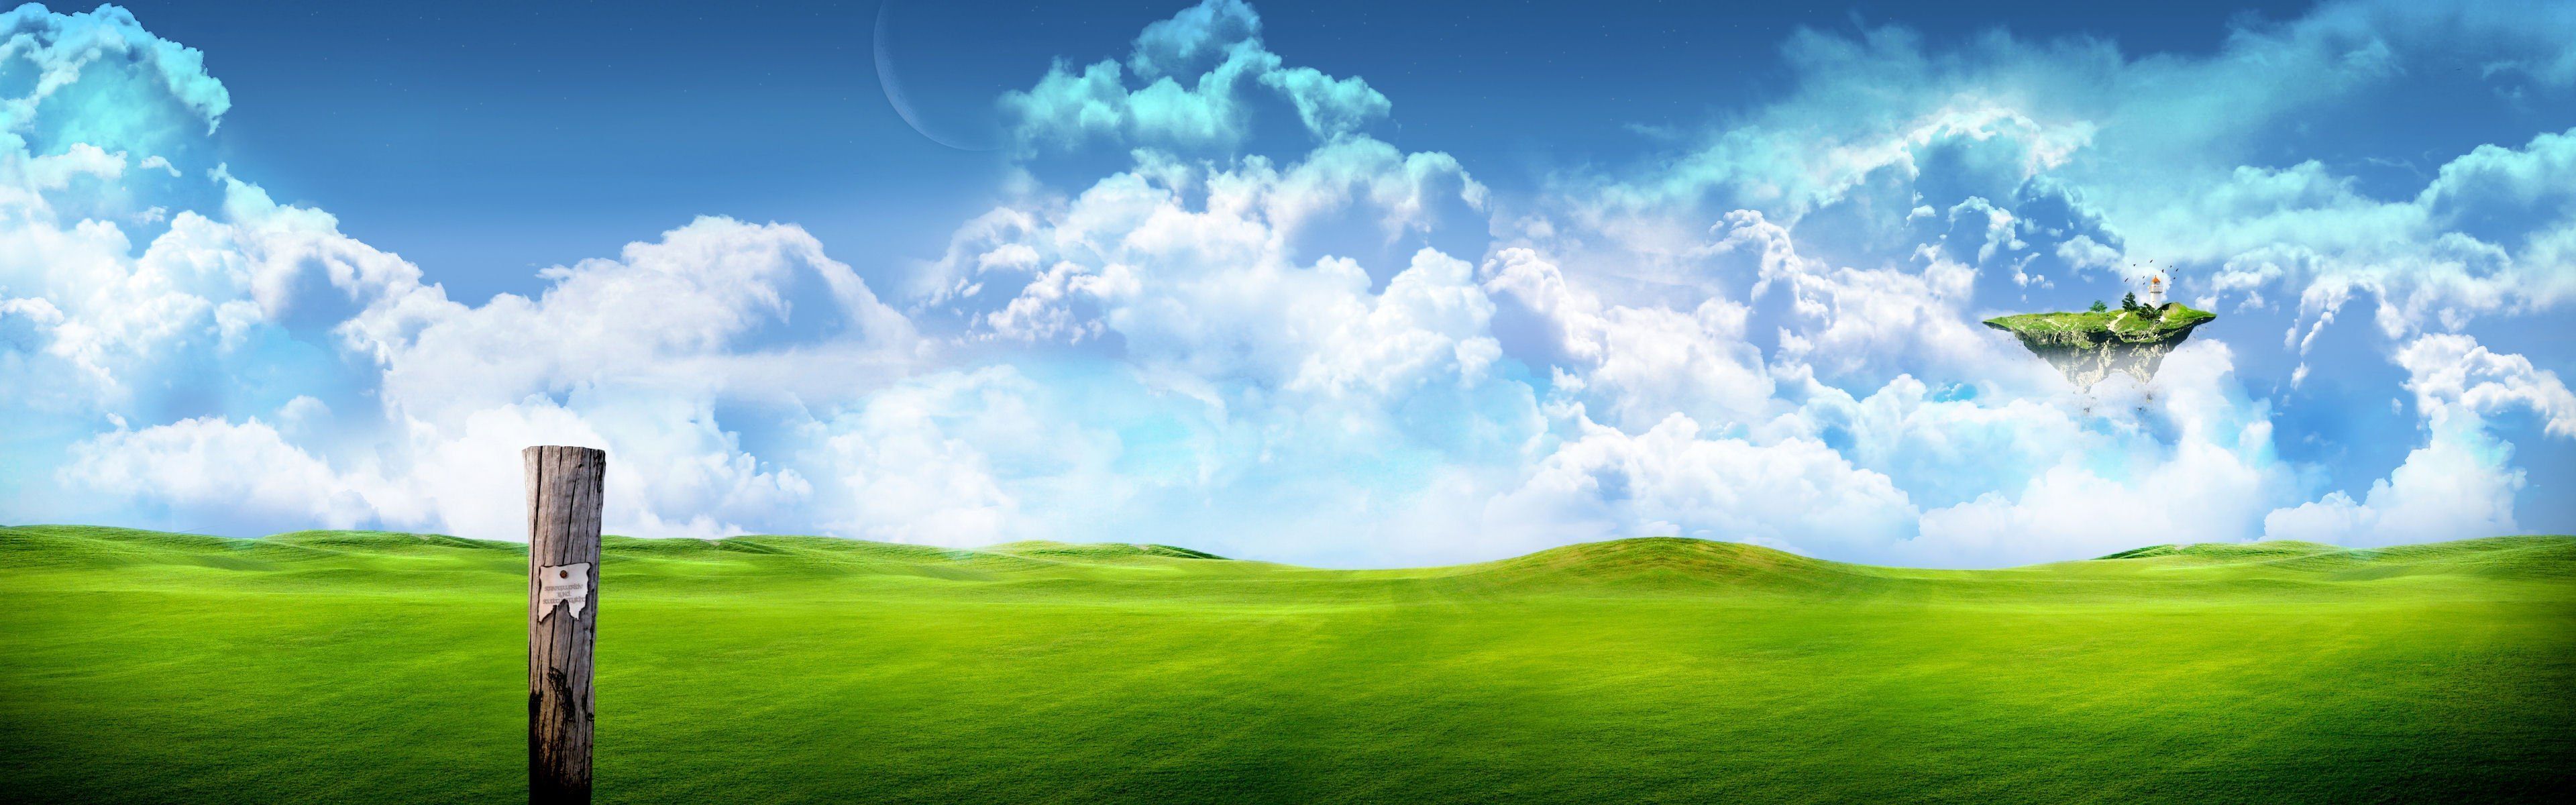 Dual monitor wallpaper 3840x1200 - (#26418) - High Quality and ...